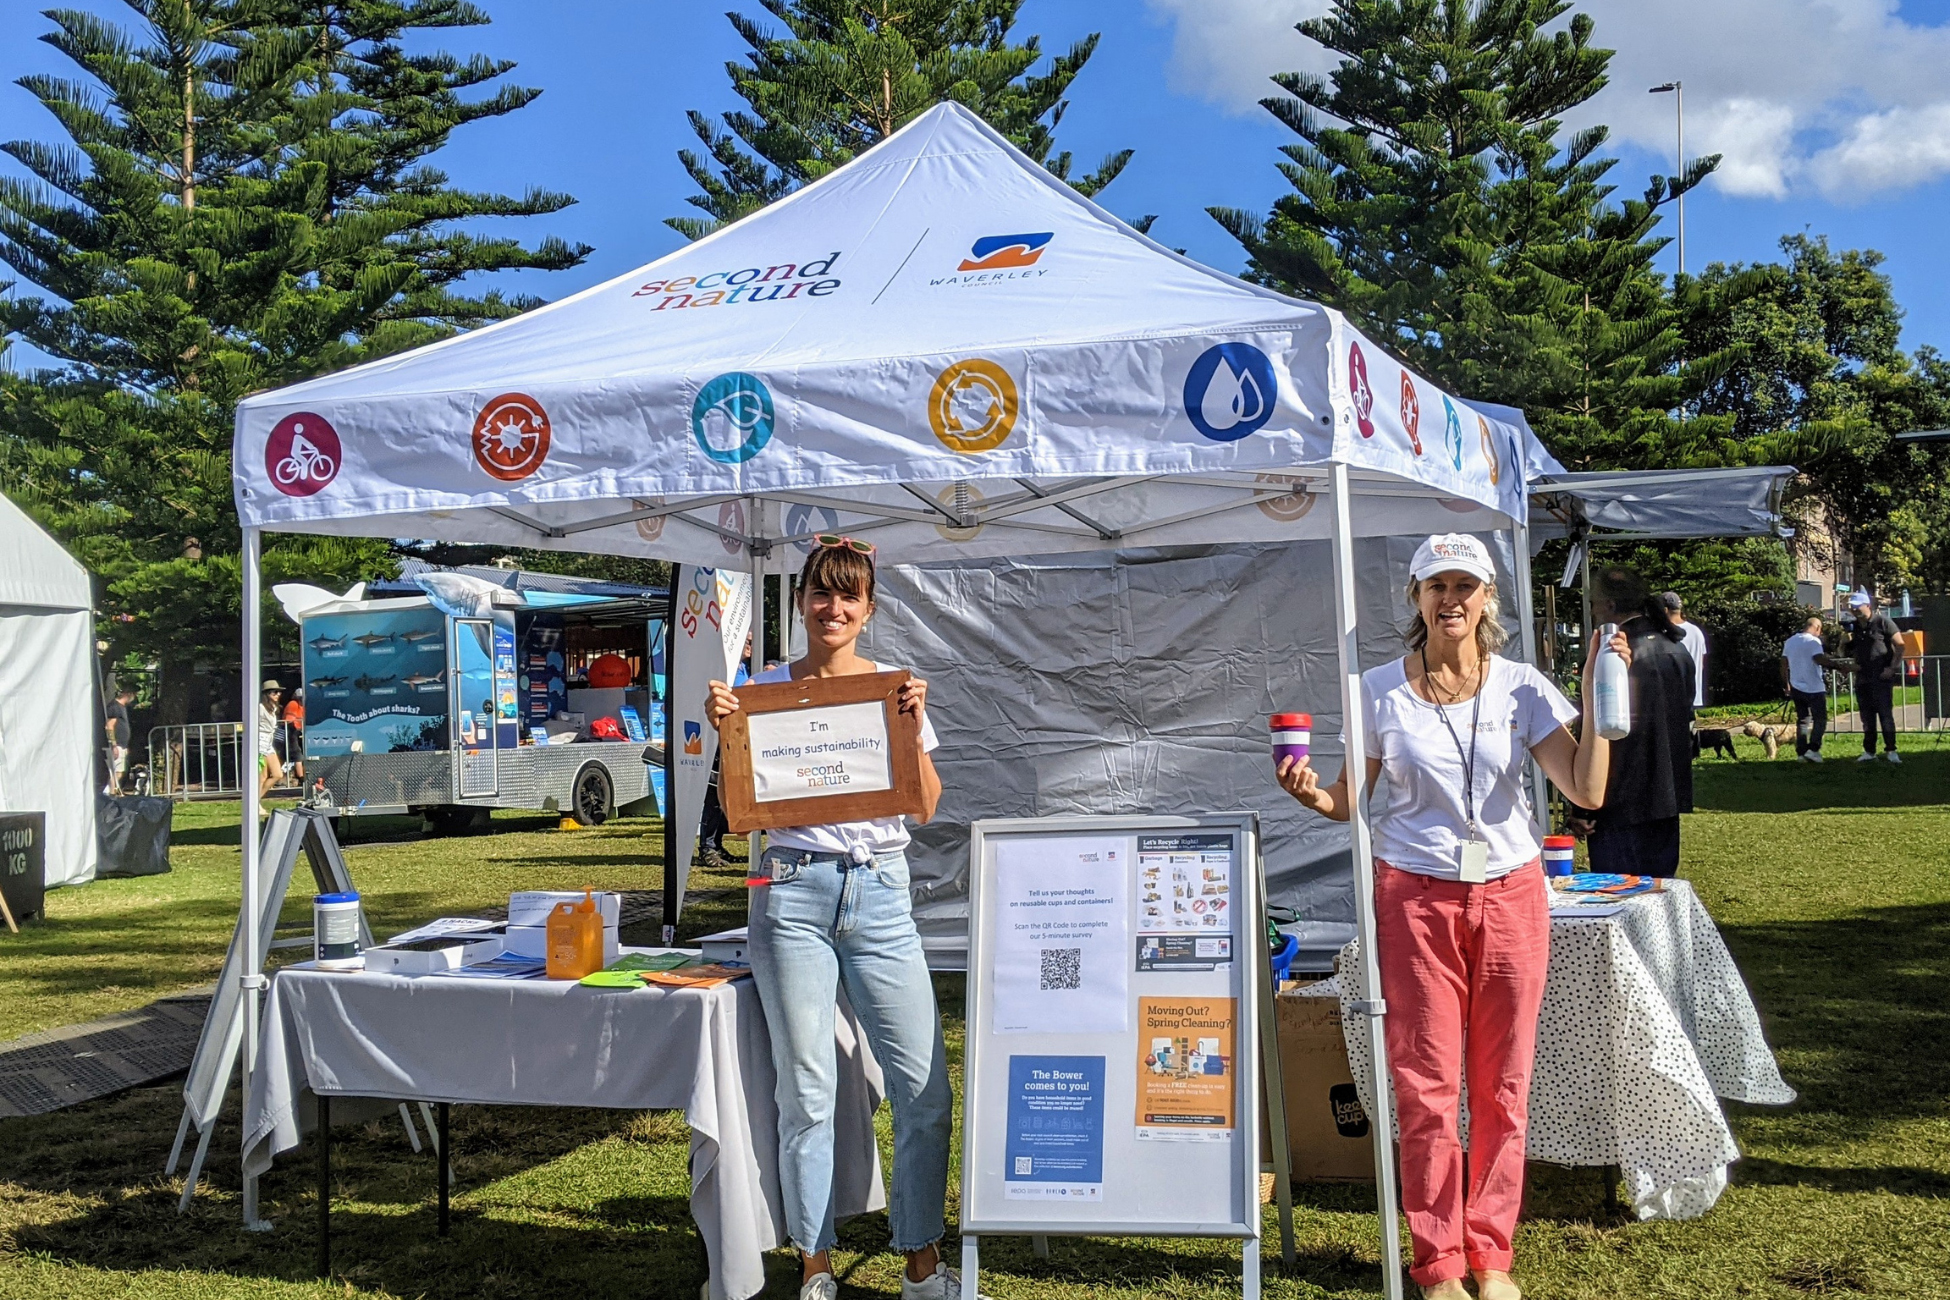 Members of Plastic Free Bronte fighting the local war on waste